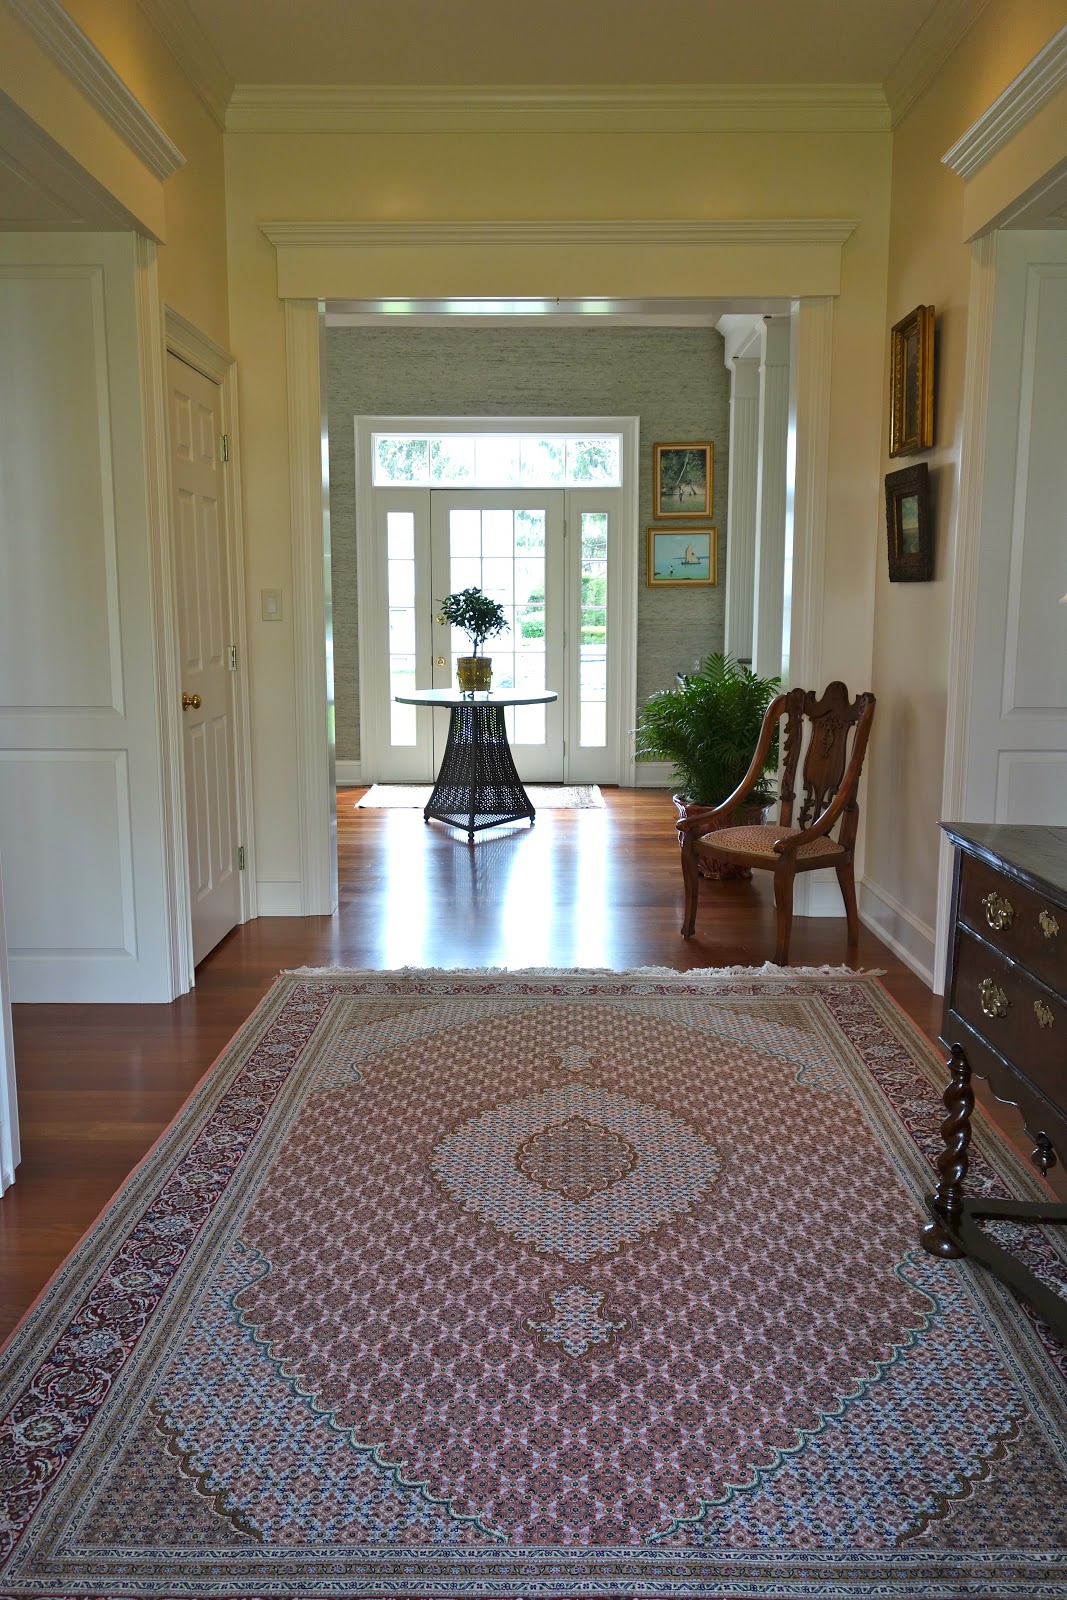 Gracious Interiors: A Welcoming Entry